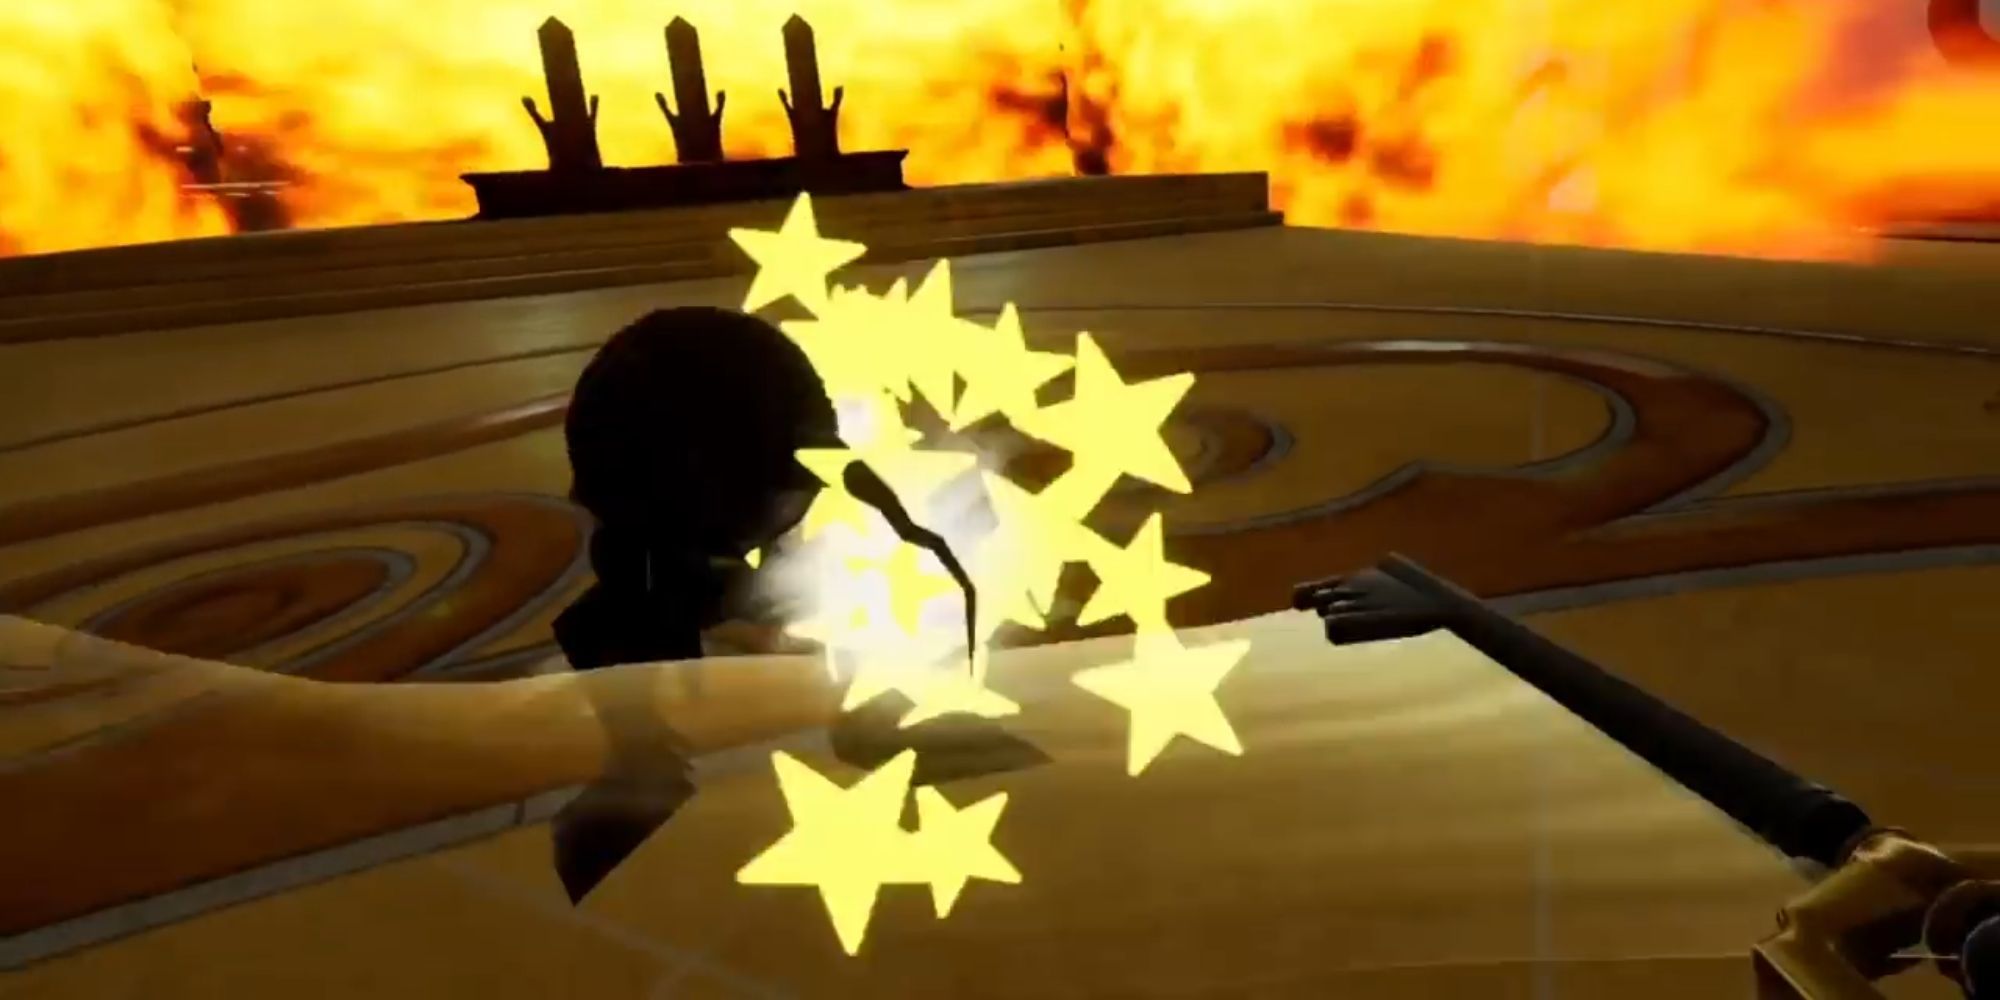 Sora defeating a Heartless with his Keyblade in VR.